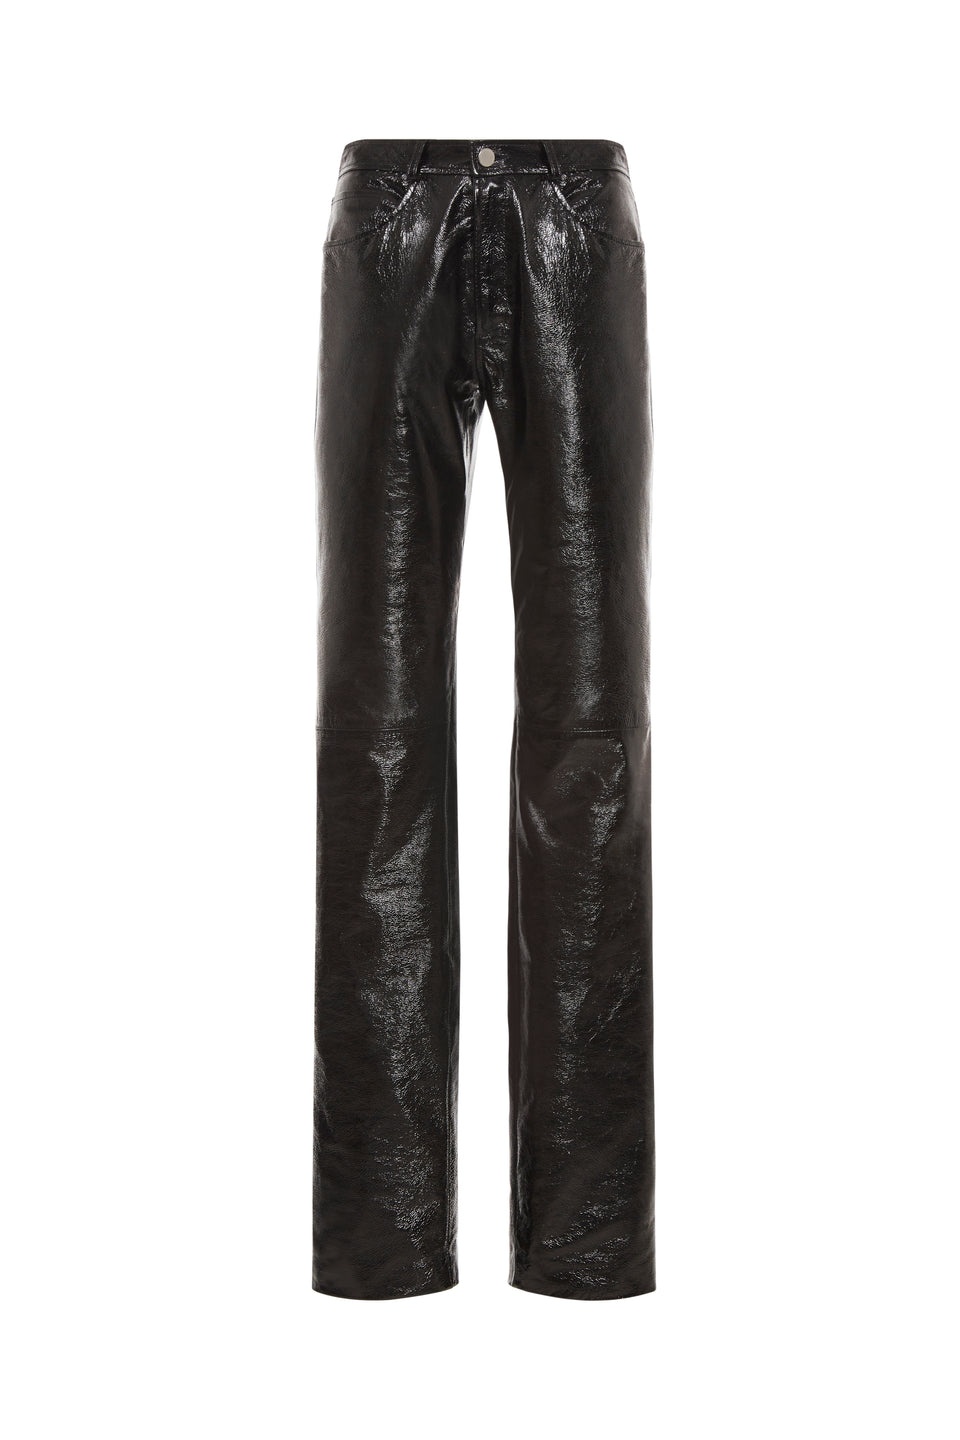 PATENT LEATHER TROUSERS - 1